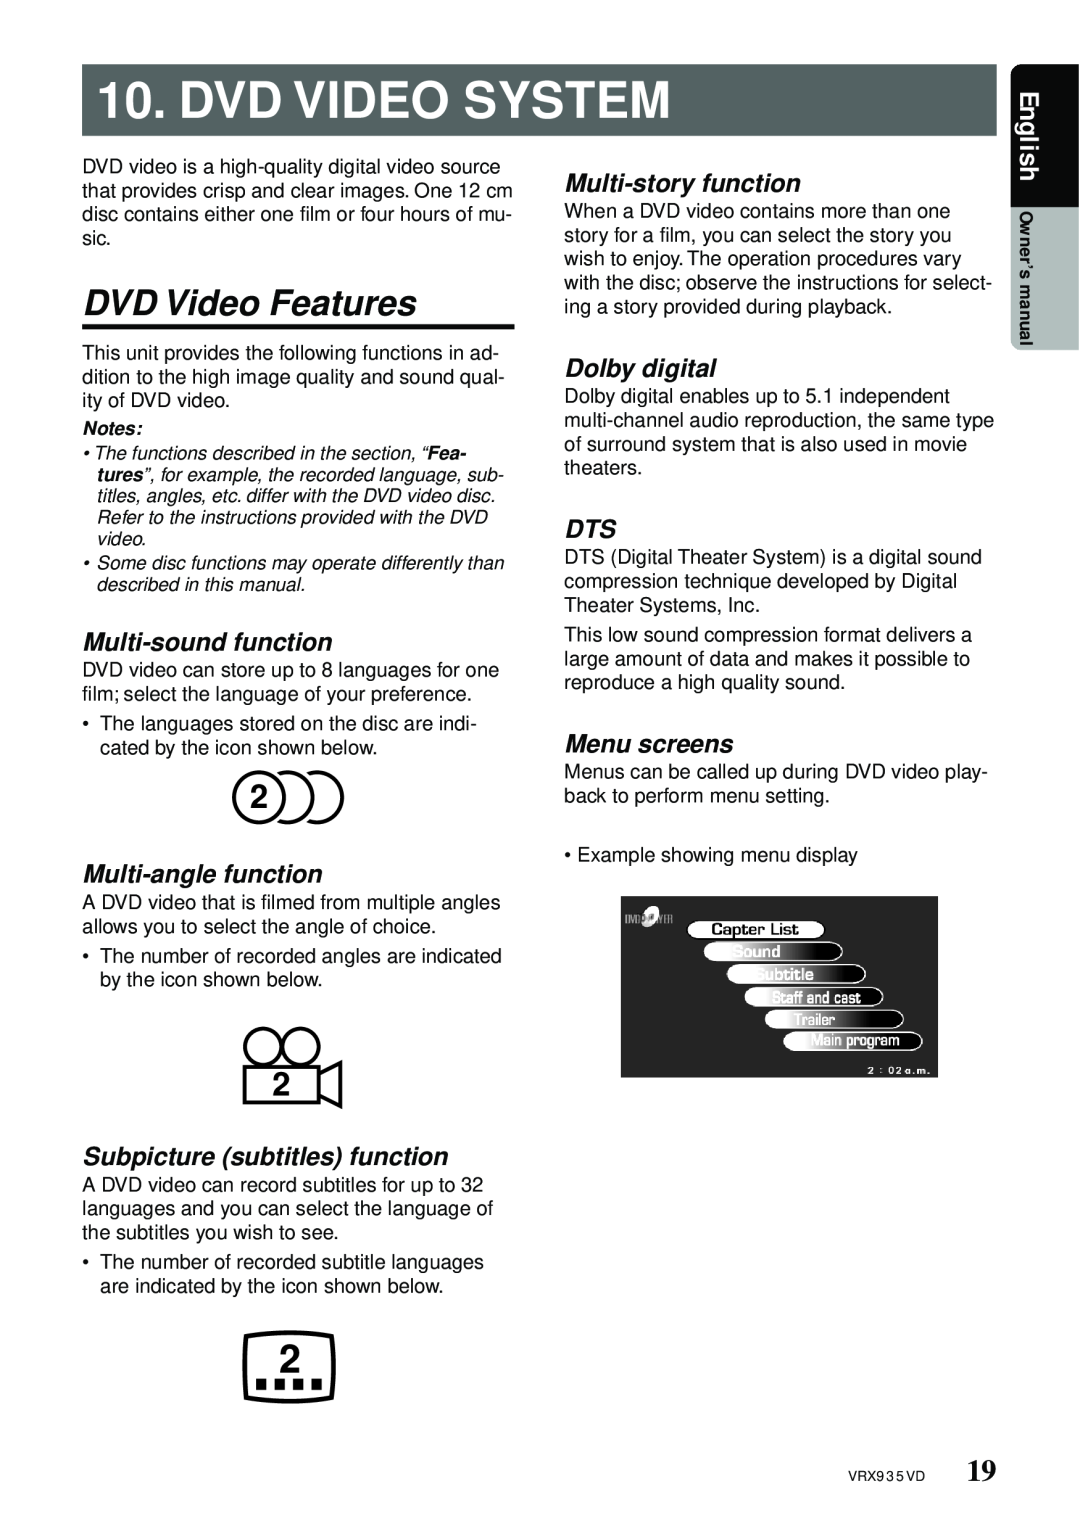 Clarion VRX935VD Dvd Video System, DVD Video Features, Multi-sound function, Multi-angle function, Multi-story function 